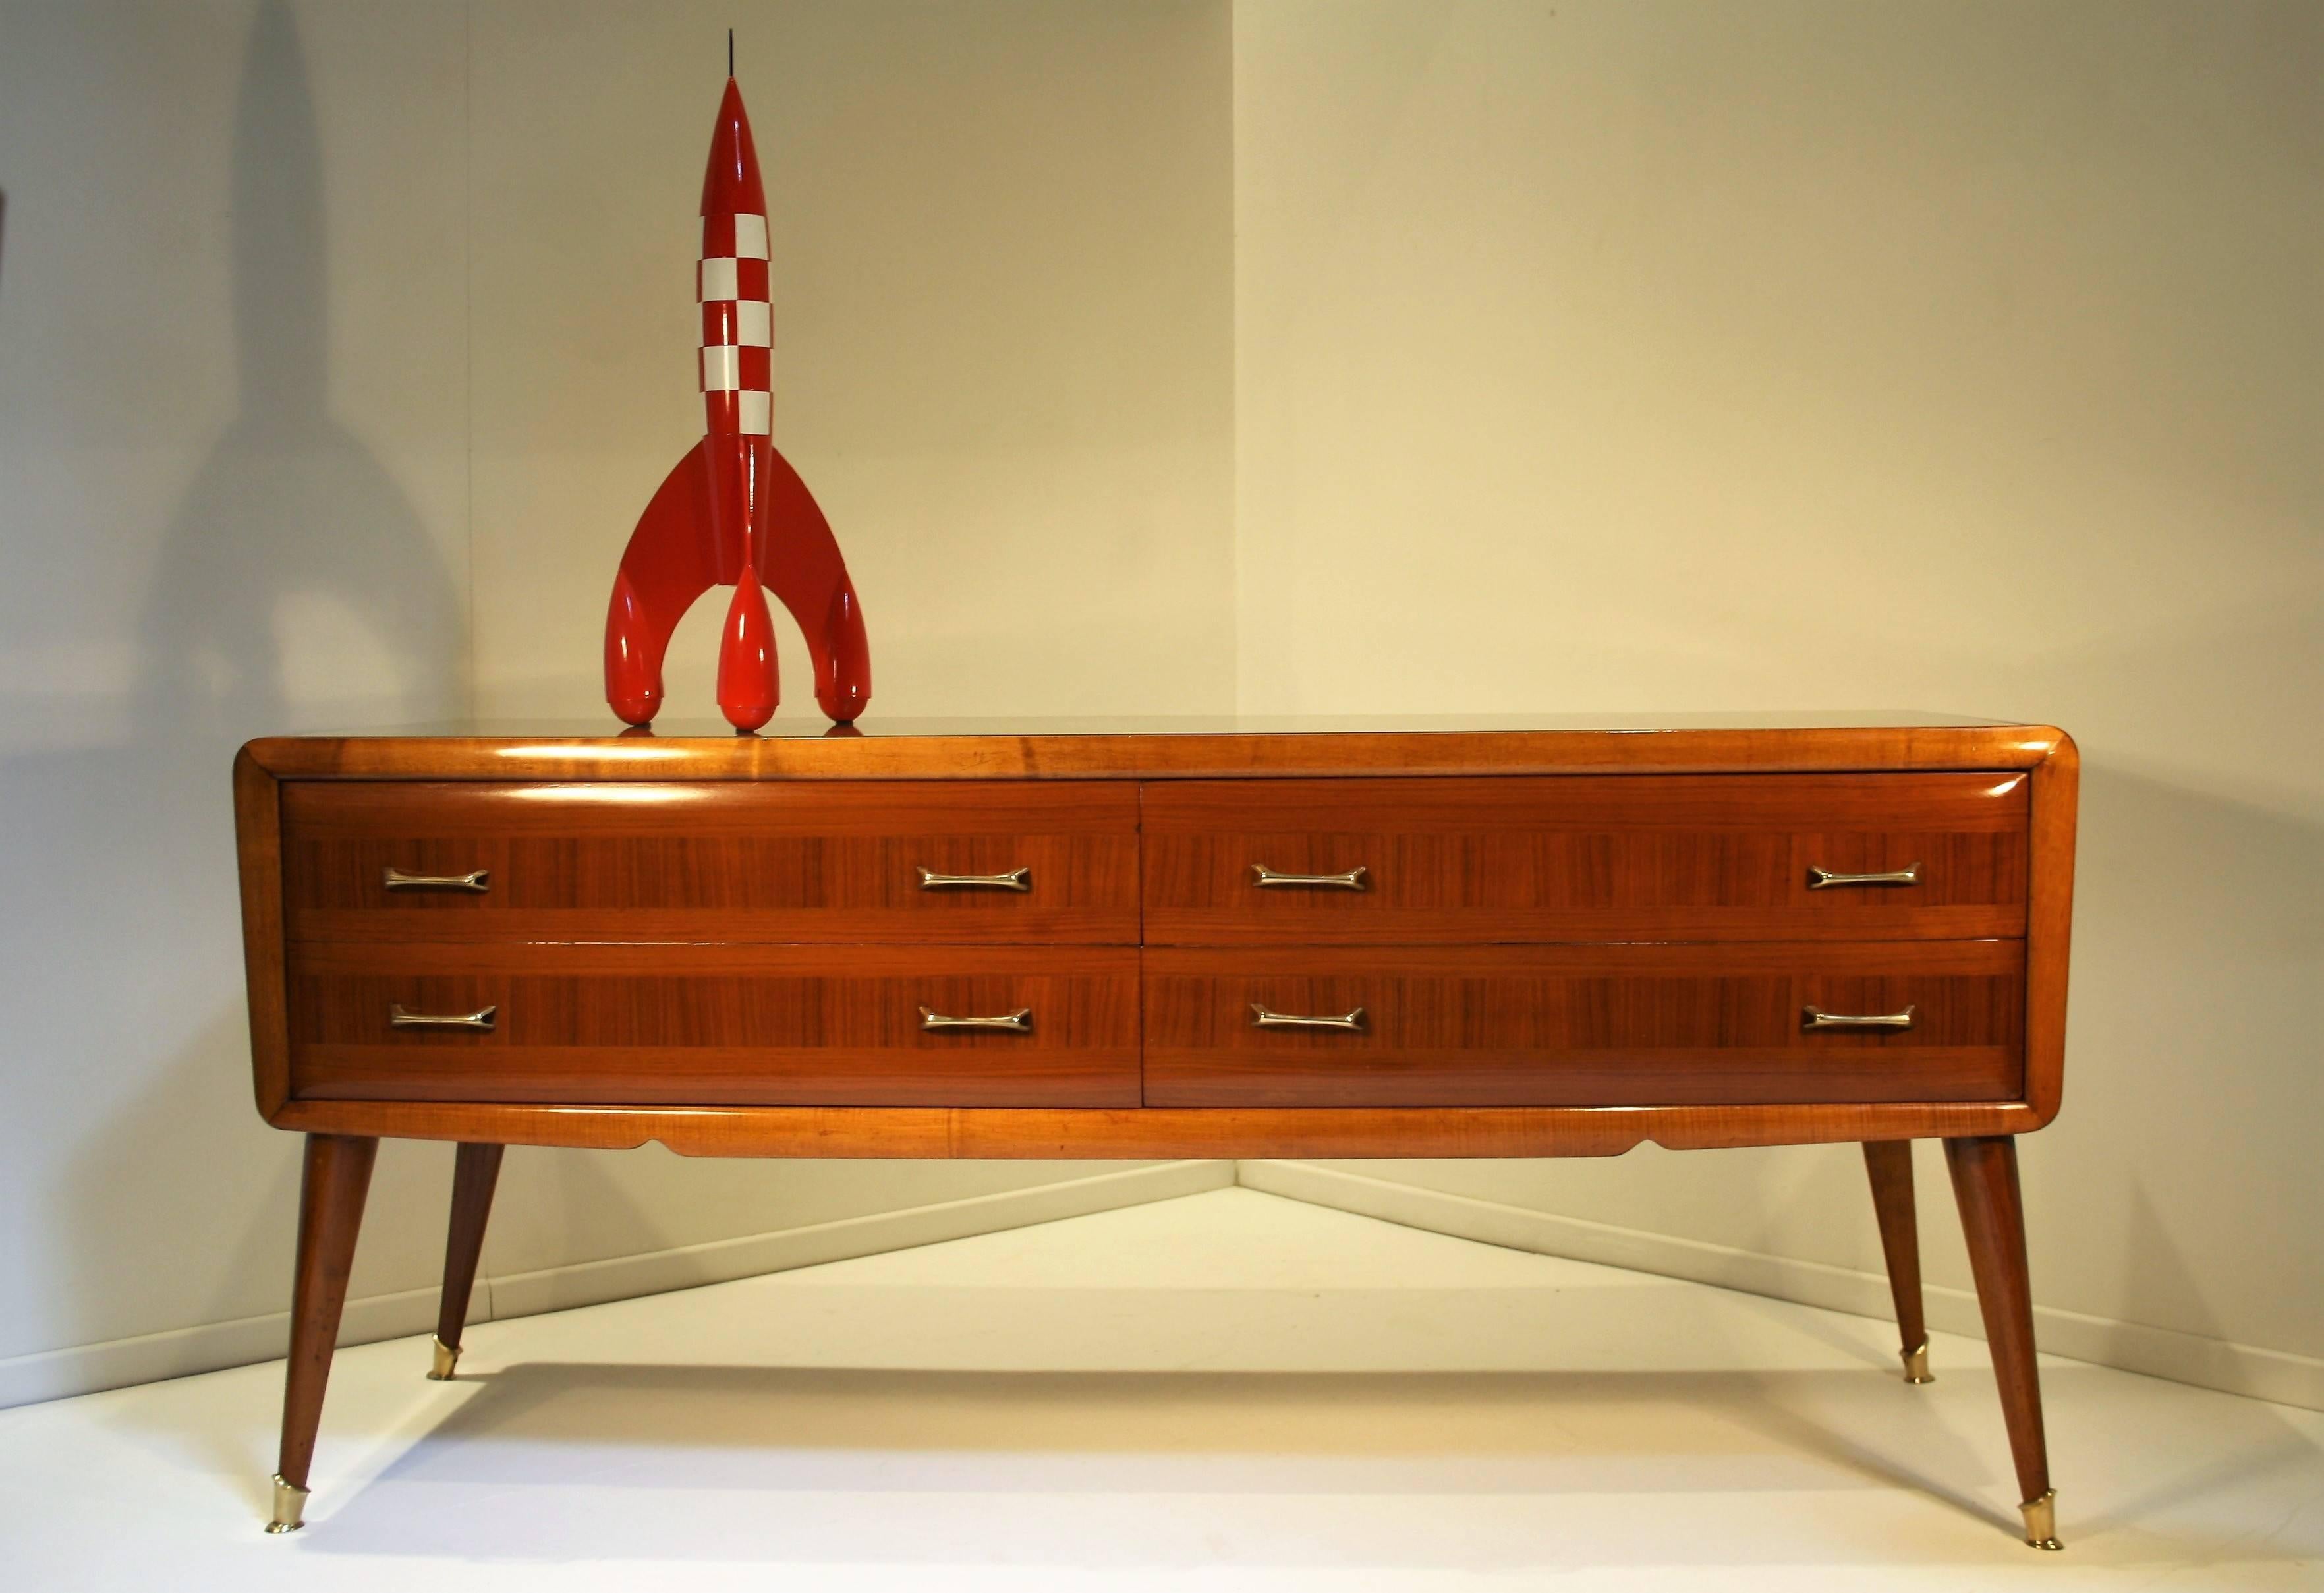 Elegant sideboard by Paolo Buffa standing on four oval conical legs that end in a brass base.
The four drawers have nicely detailed brass handles and the sideboard still has its original polish in very good condition.
The top has a gold tinted